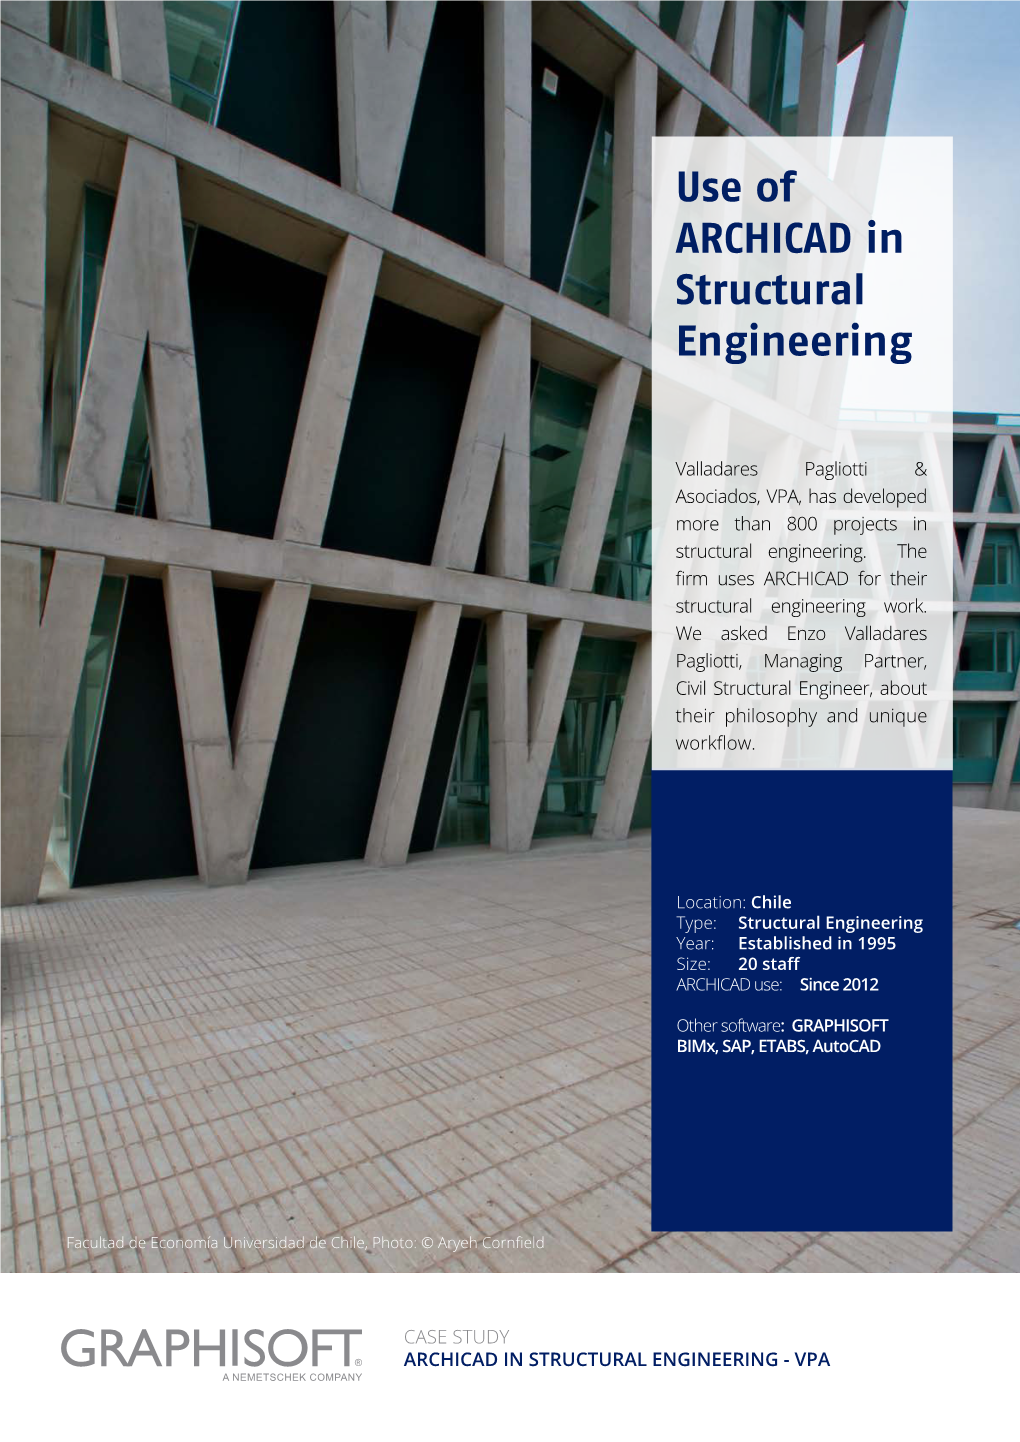 Use of ARCHICAD in Structural Engineering